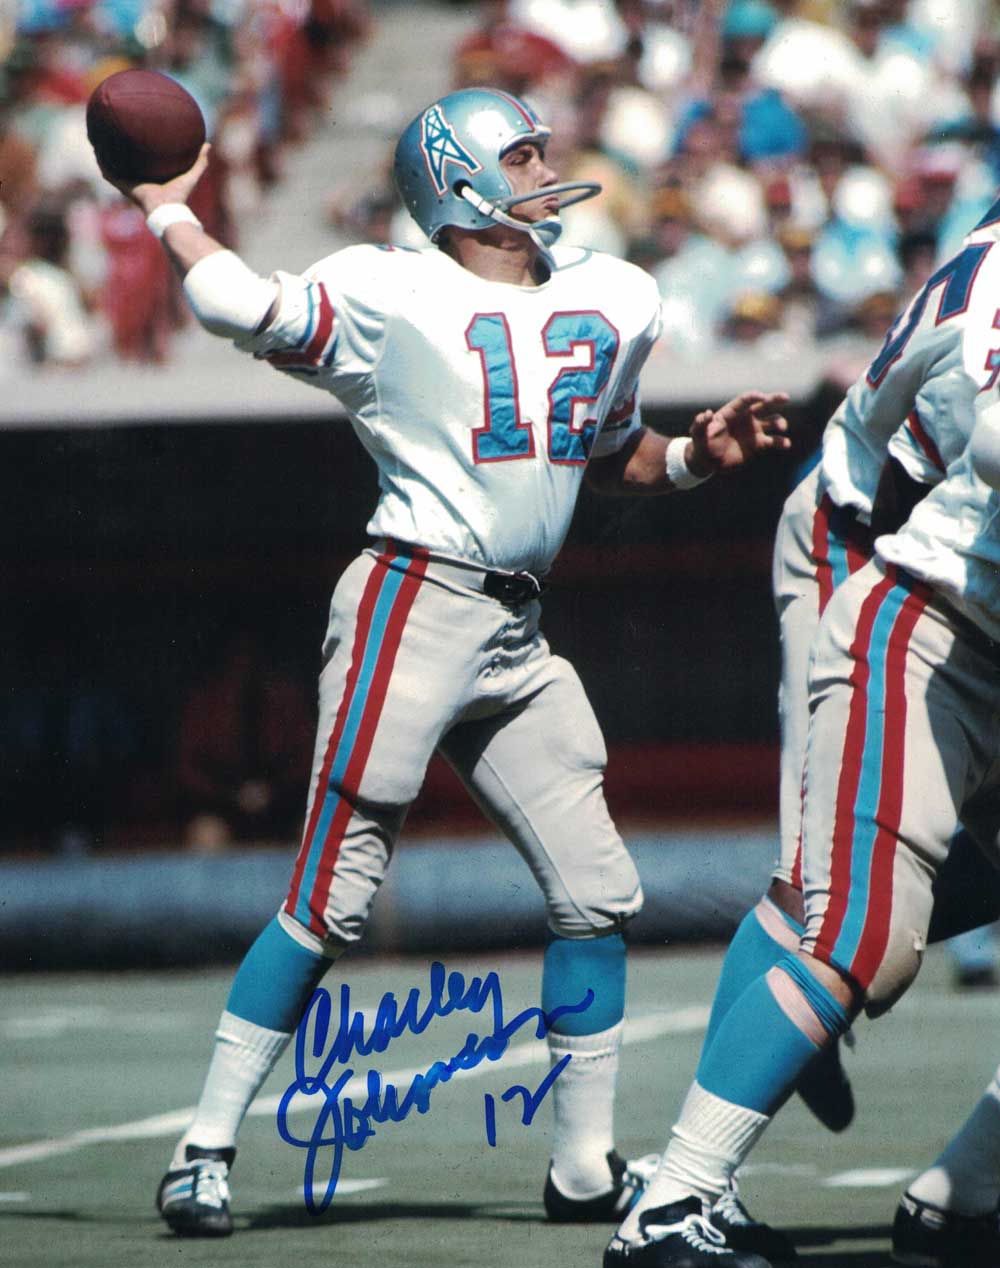 Charley Johnson Autographed/Signed Houston Oilers 8x10 Photo 30178